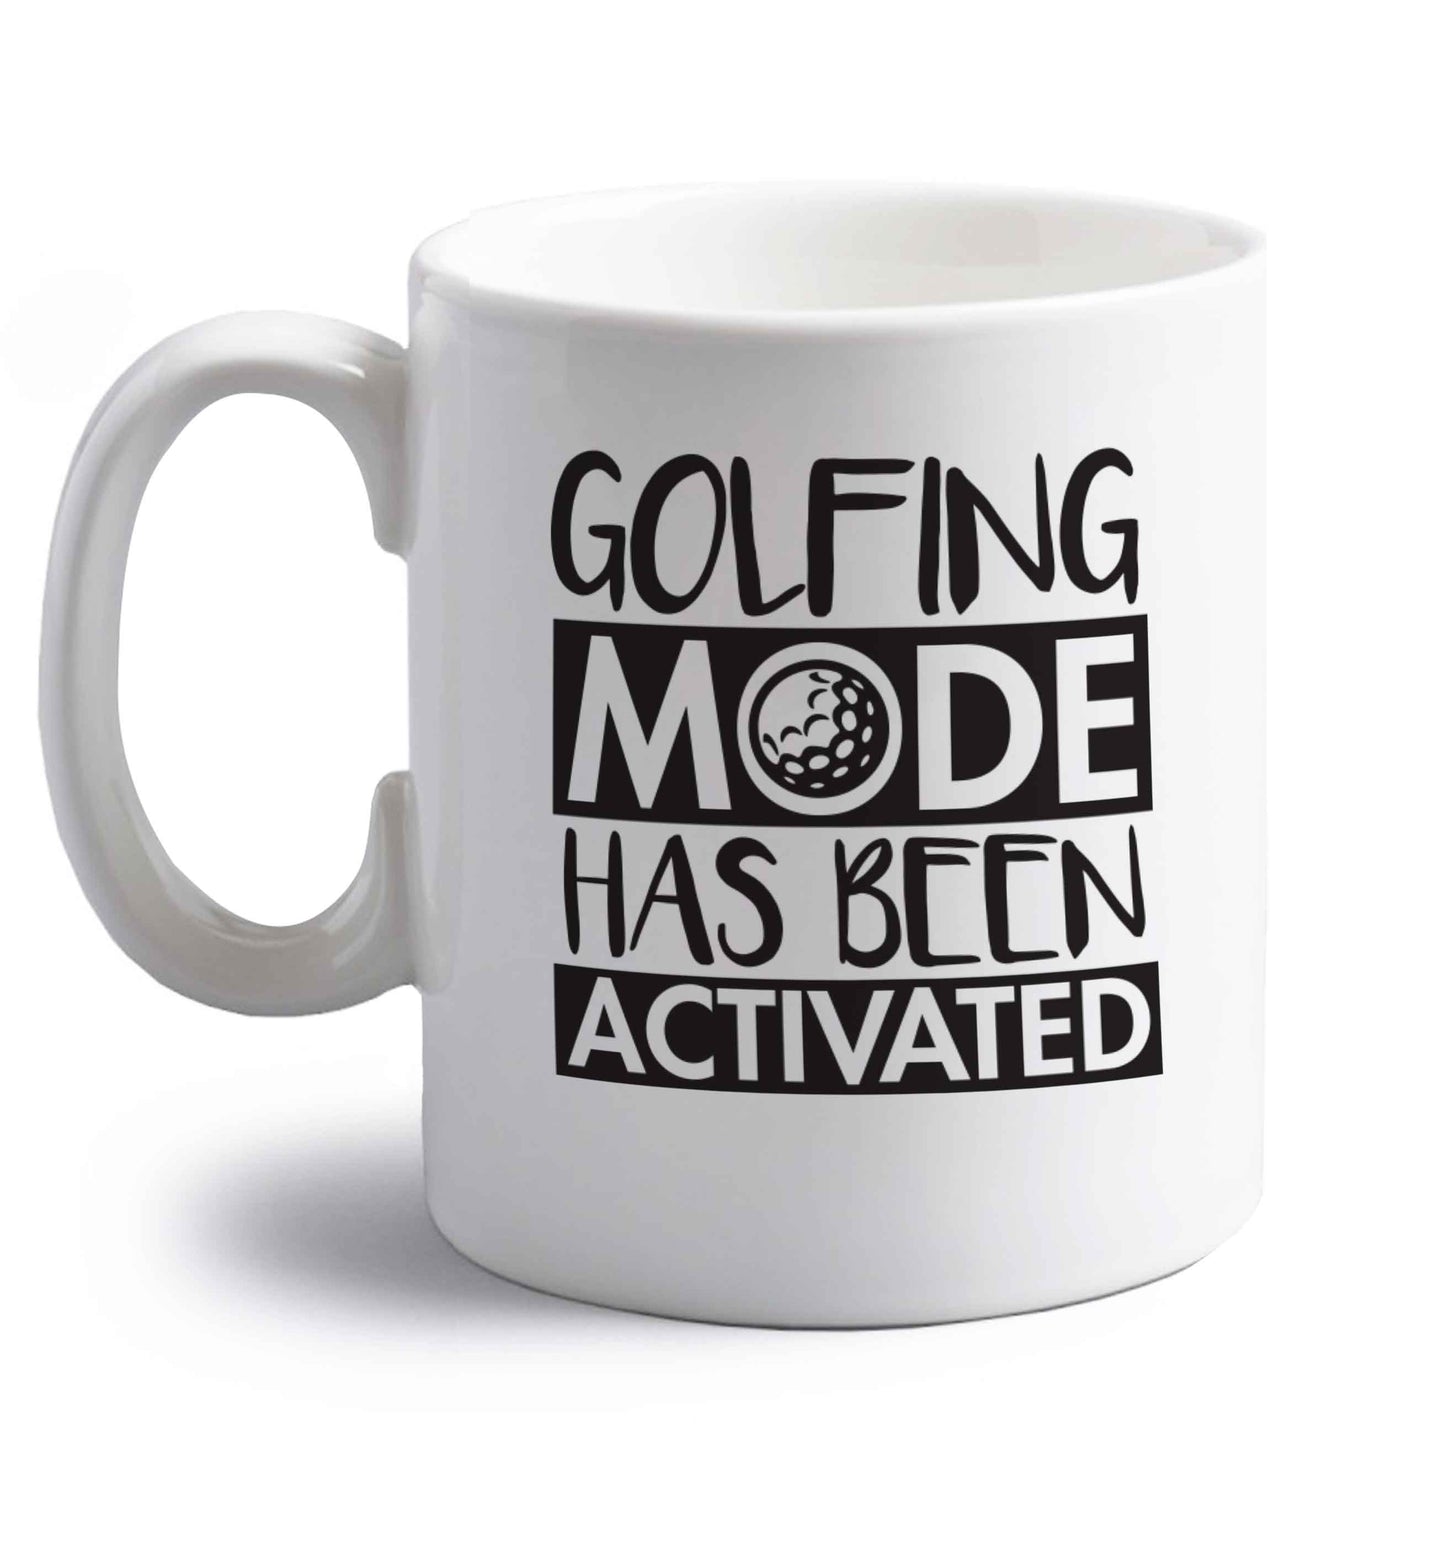 Golfing mode has been activated right handed white ceramic mug 